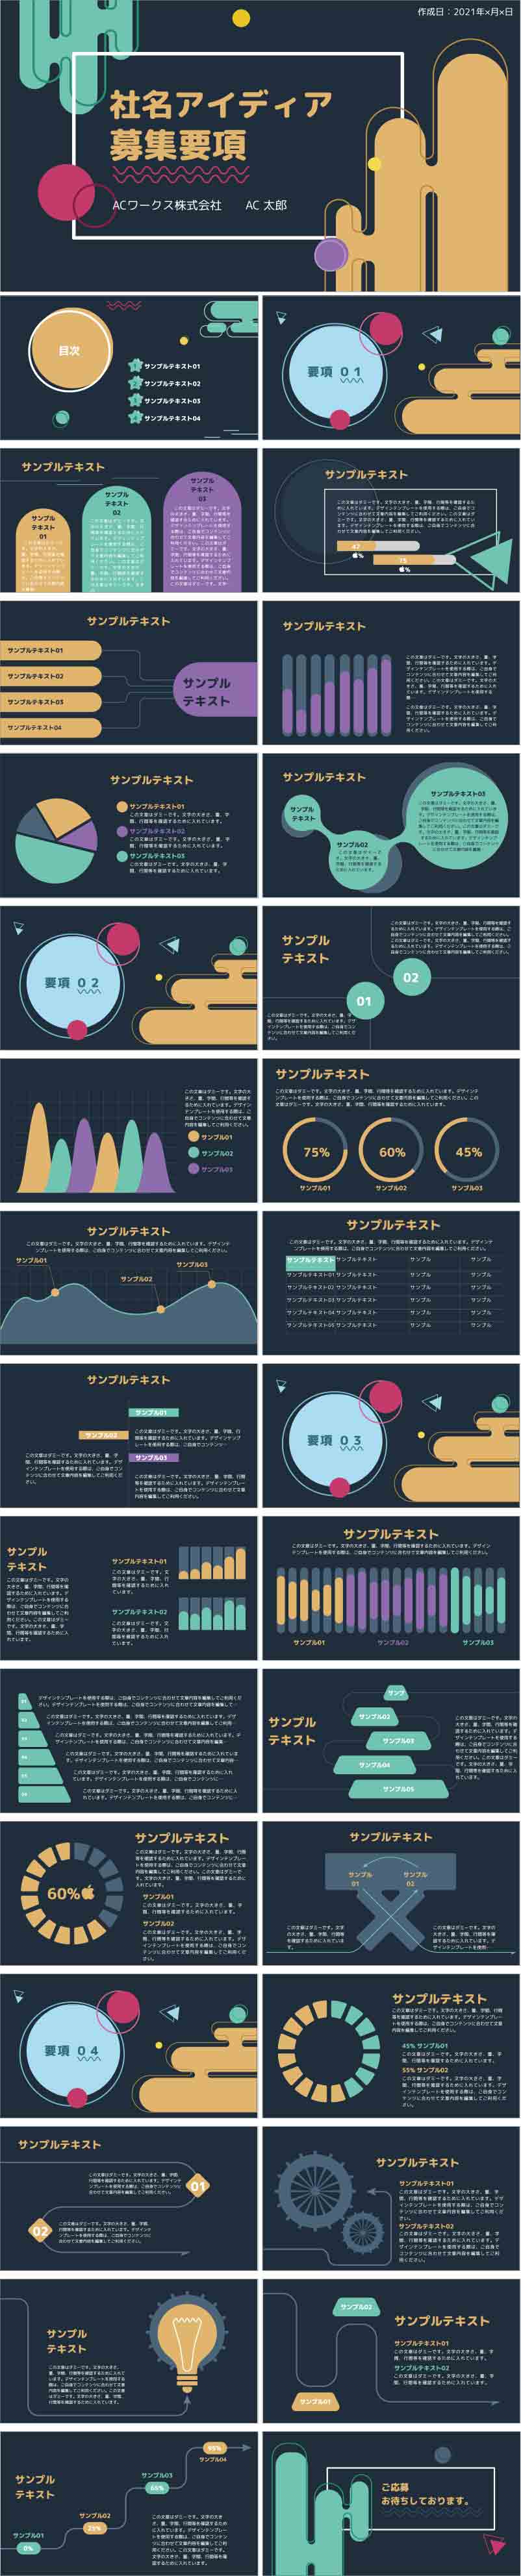 PowerPoint template vol.77